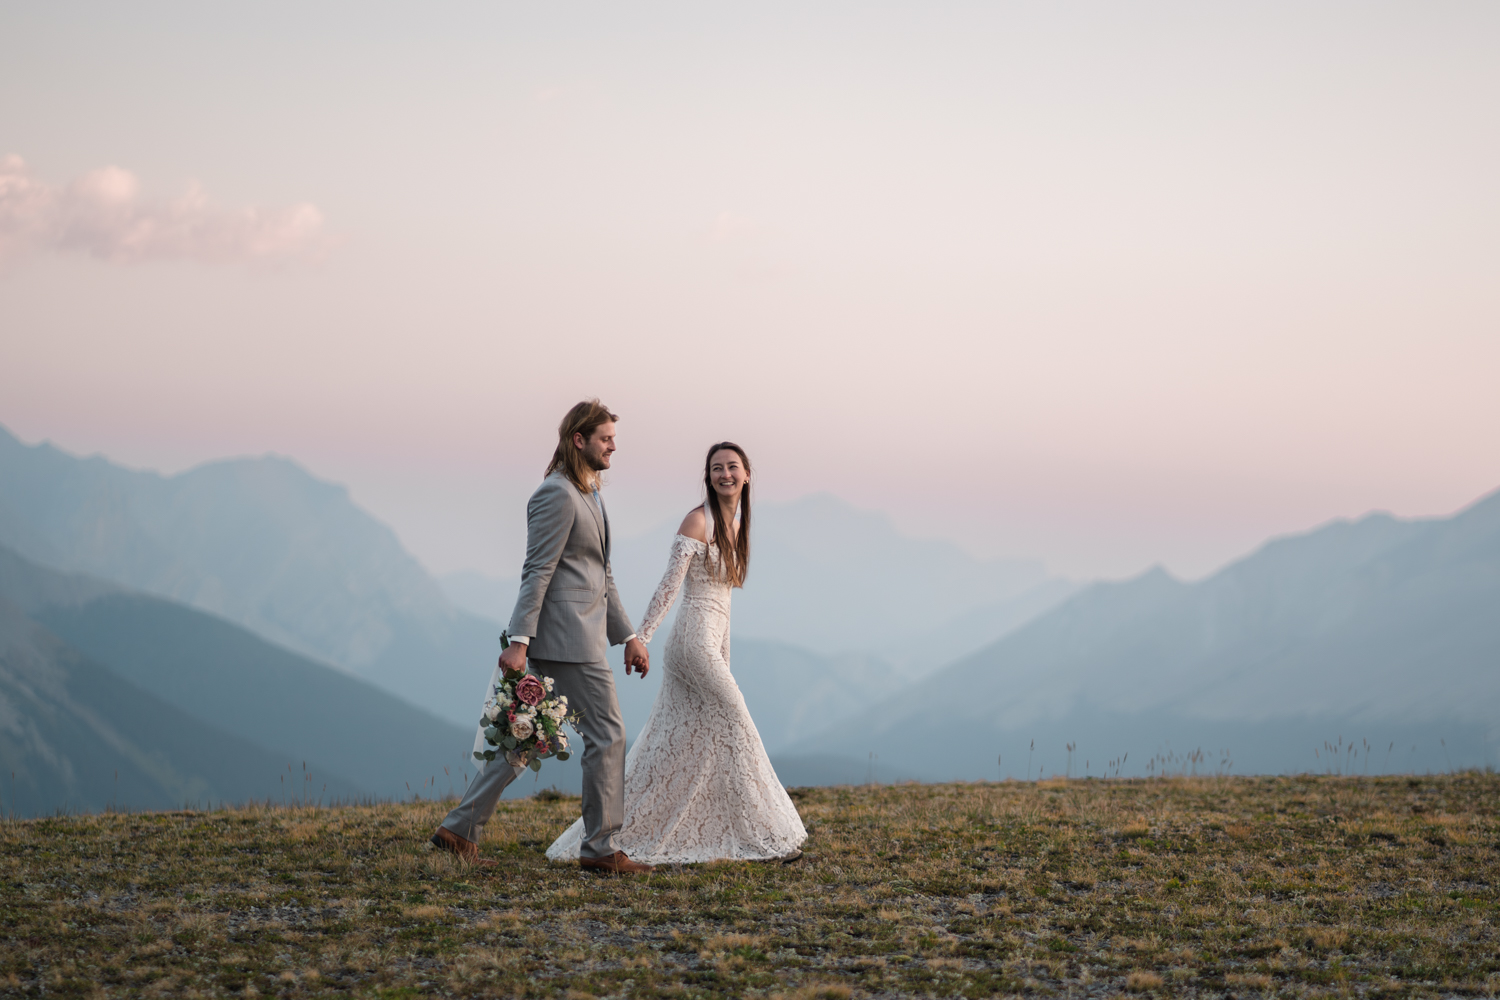 The gentle light of sunrise adding to the romance of a couple's portraits during their backcountry camping elopement in Alberta's Kananaskis